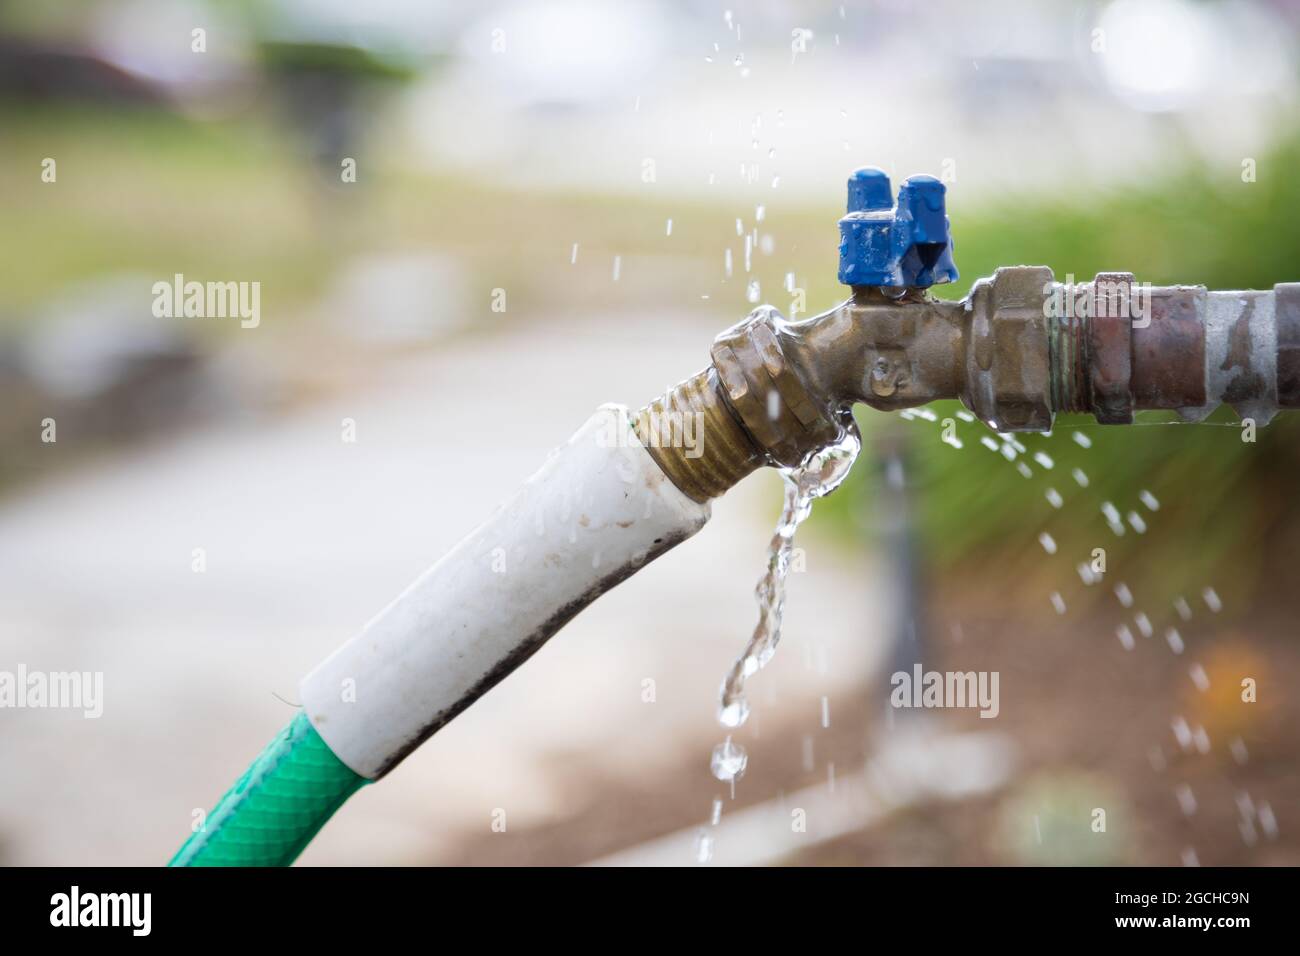 Exterior water faucet with garden hose leaking water Stock Photo